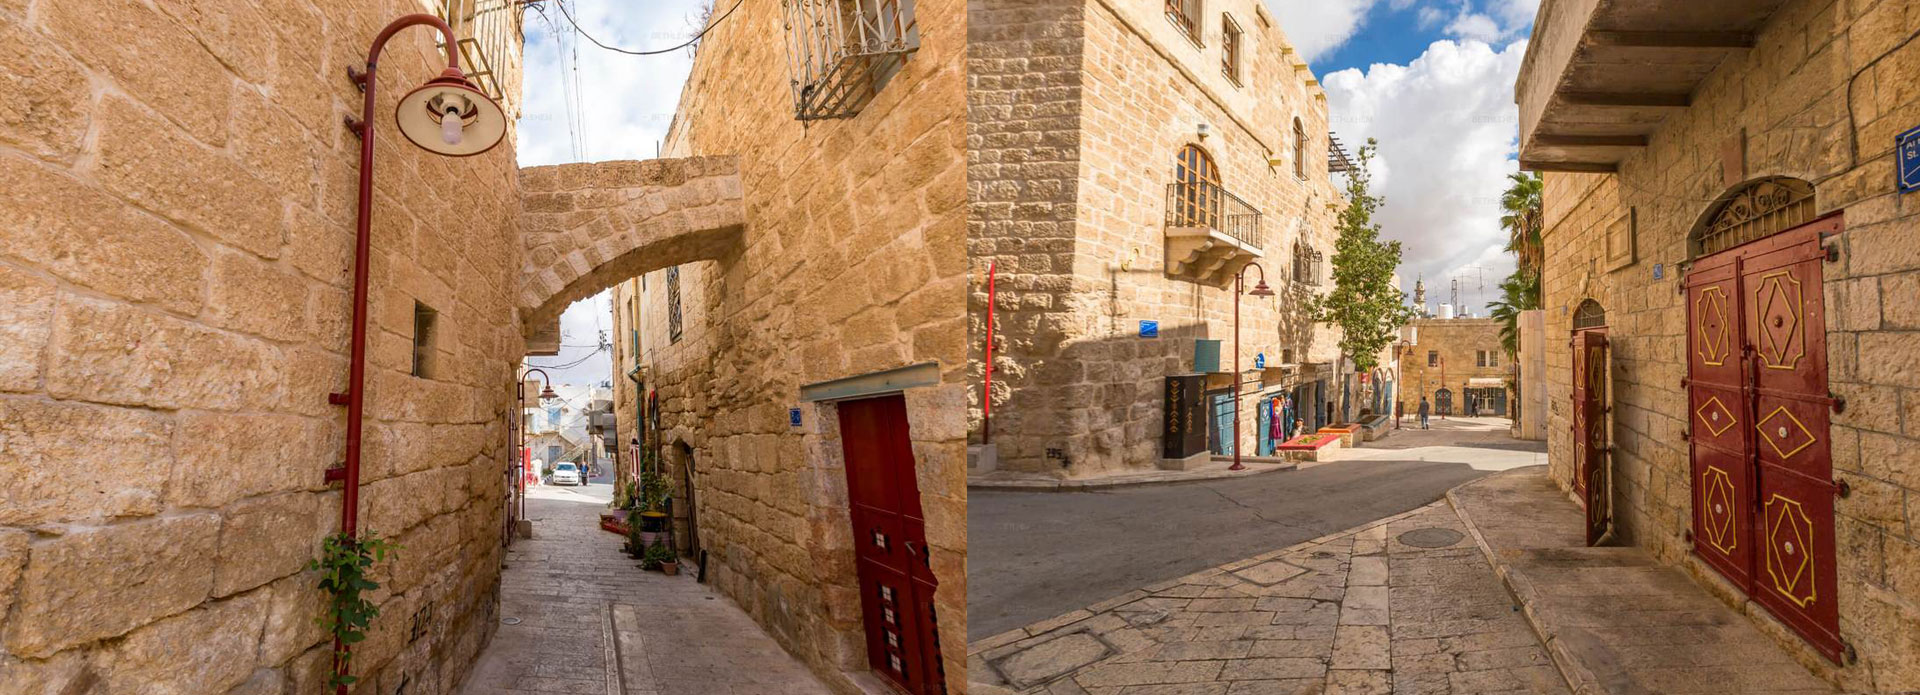 The Old City of Beit Sahour